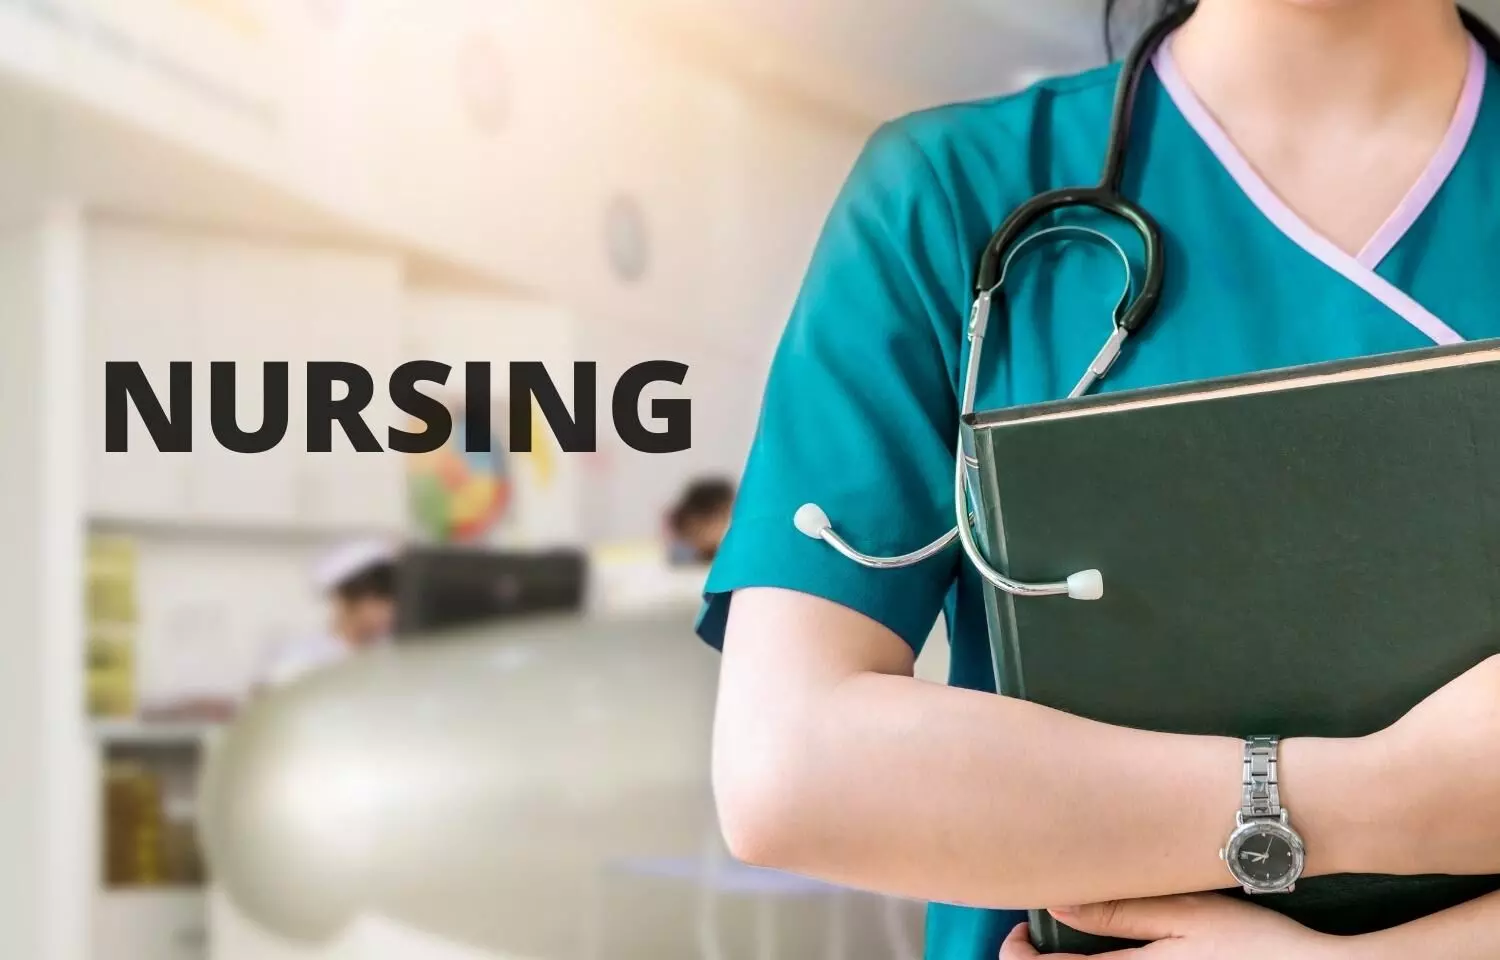 Haryana Govt Brings policy to Regulate Illegal Nursing Colleges